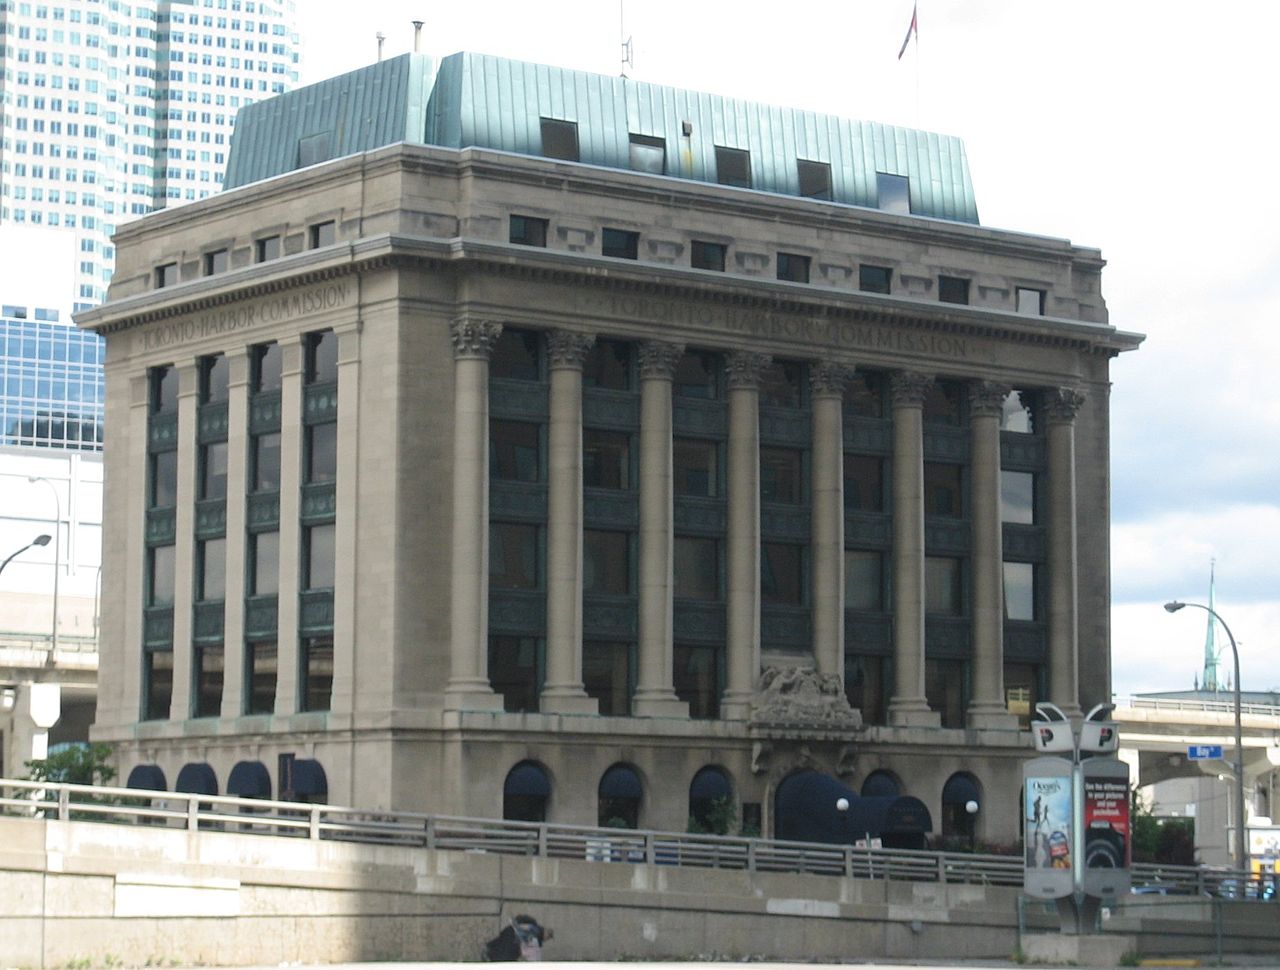 Picture of the old harbour sixty building in Toronto.